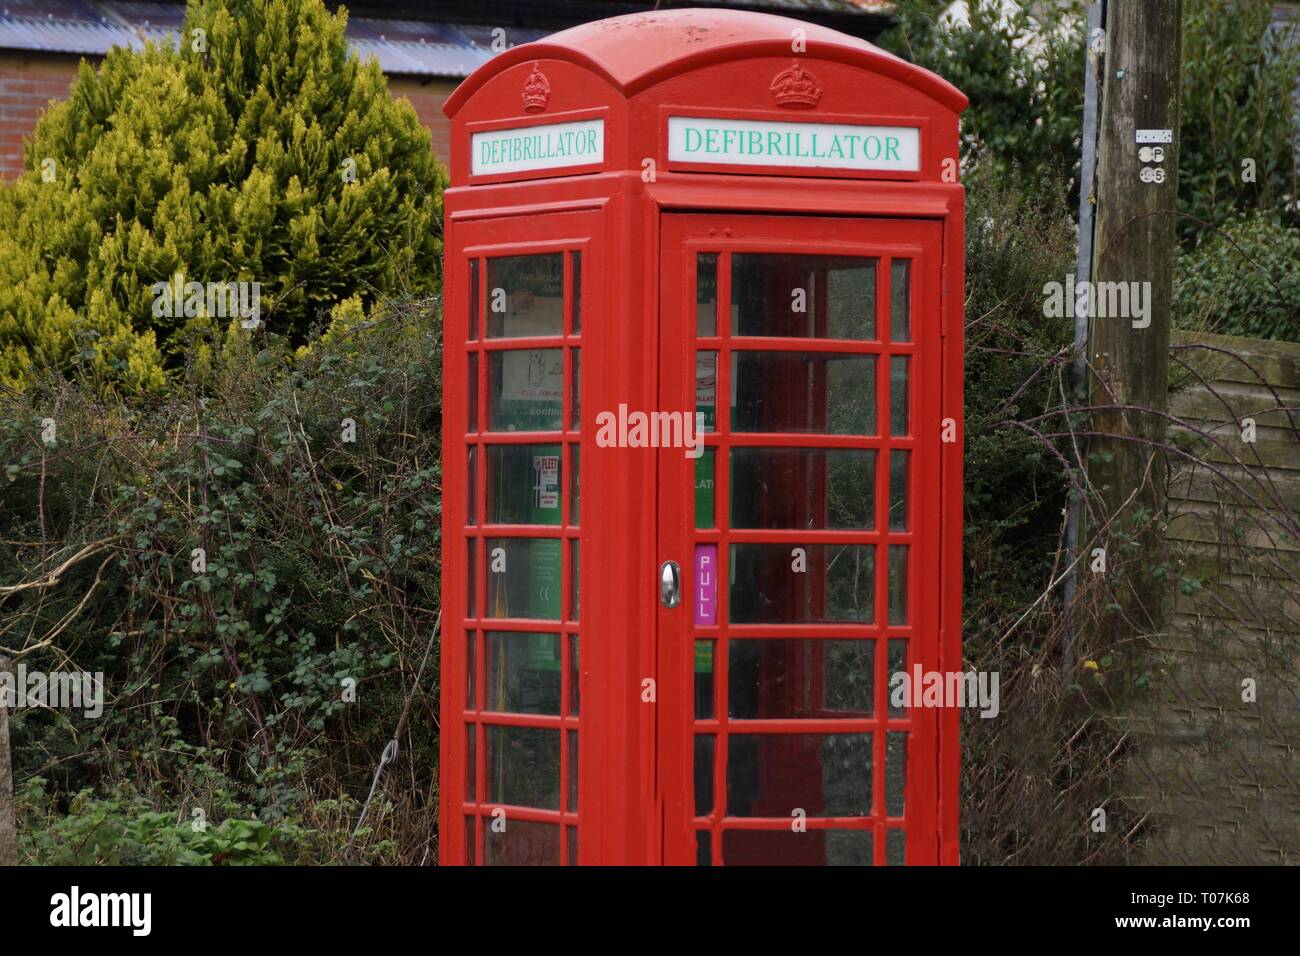 Converted telephone booths Cornwall UK Stock Photo